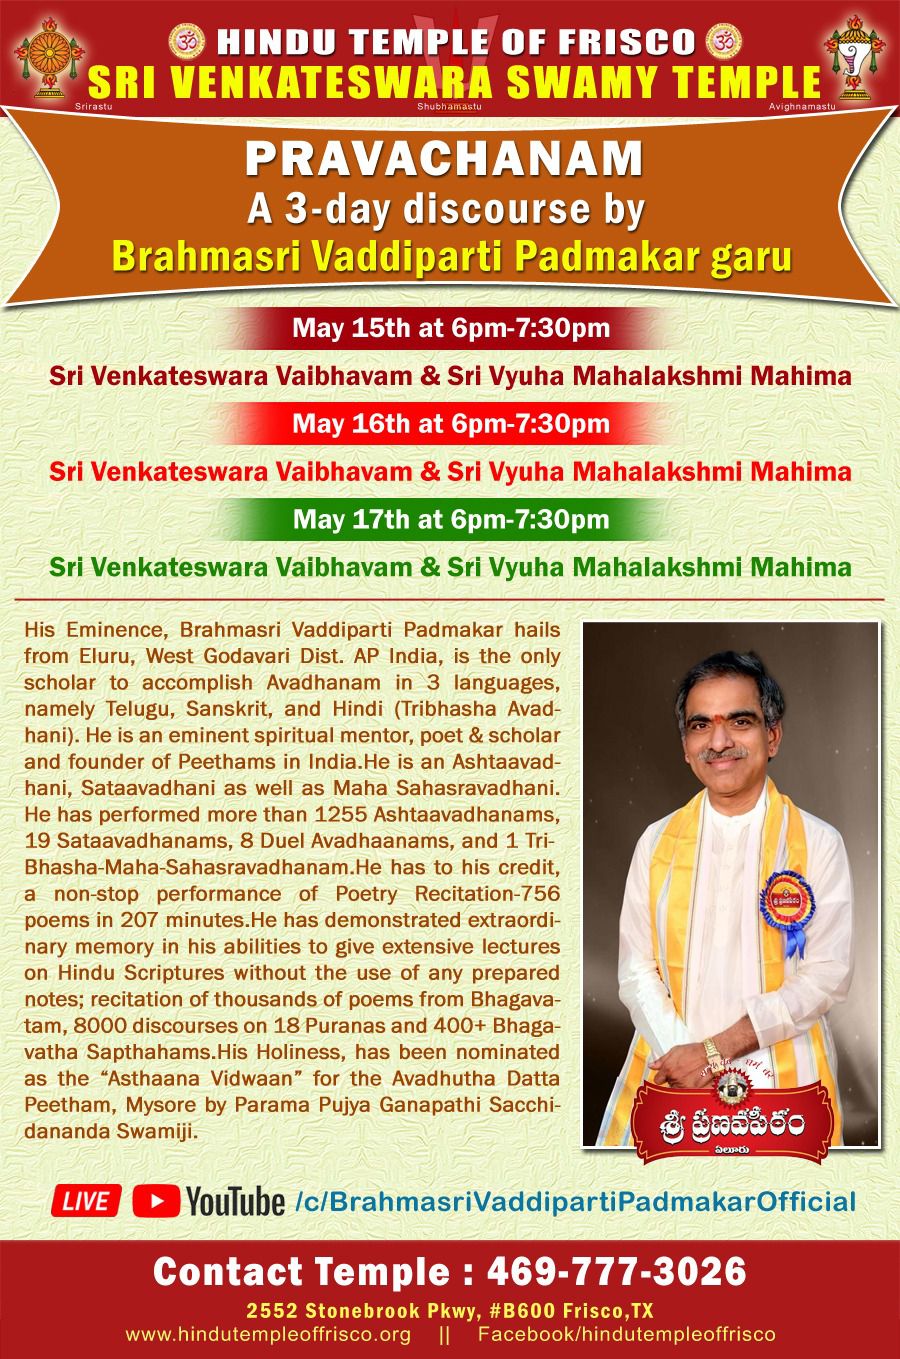 PRAVACHANAM from May 15th to May 17th